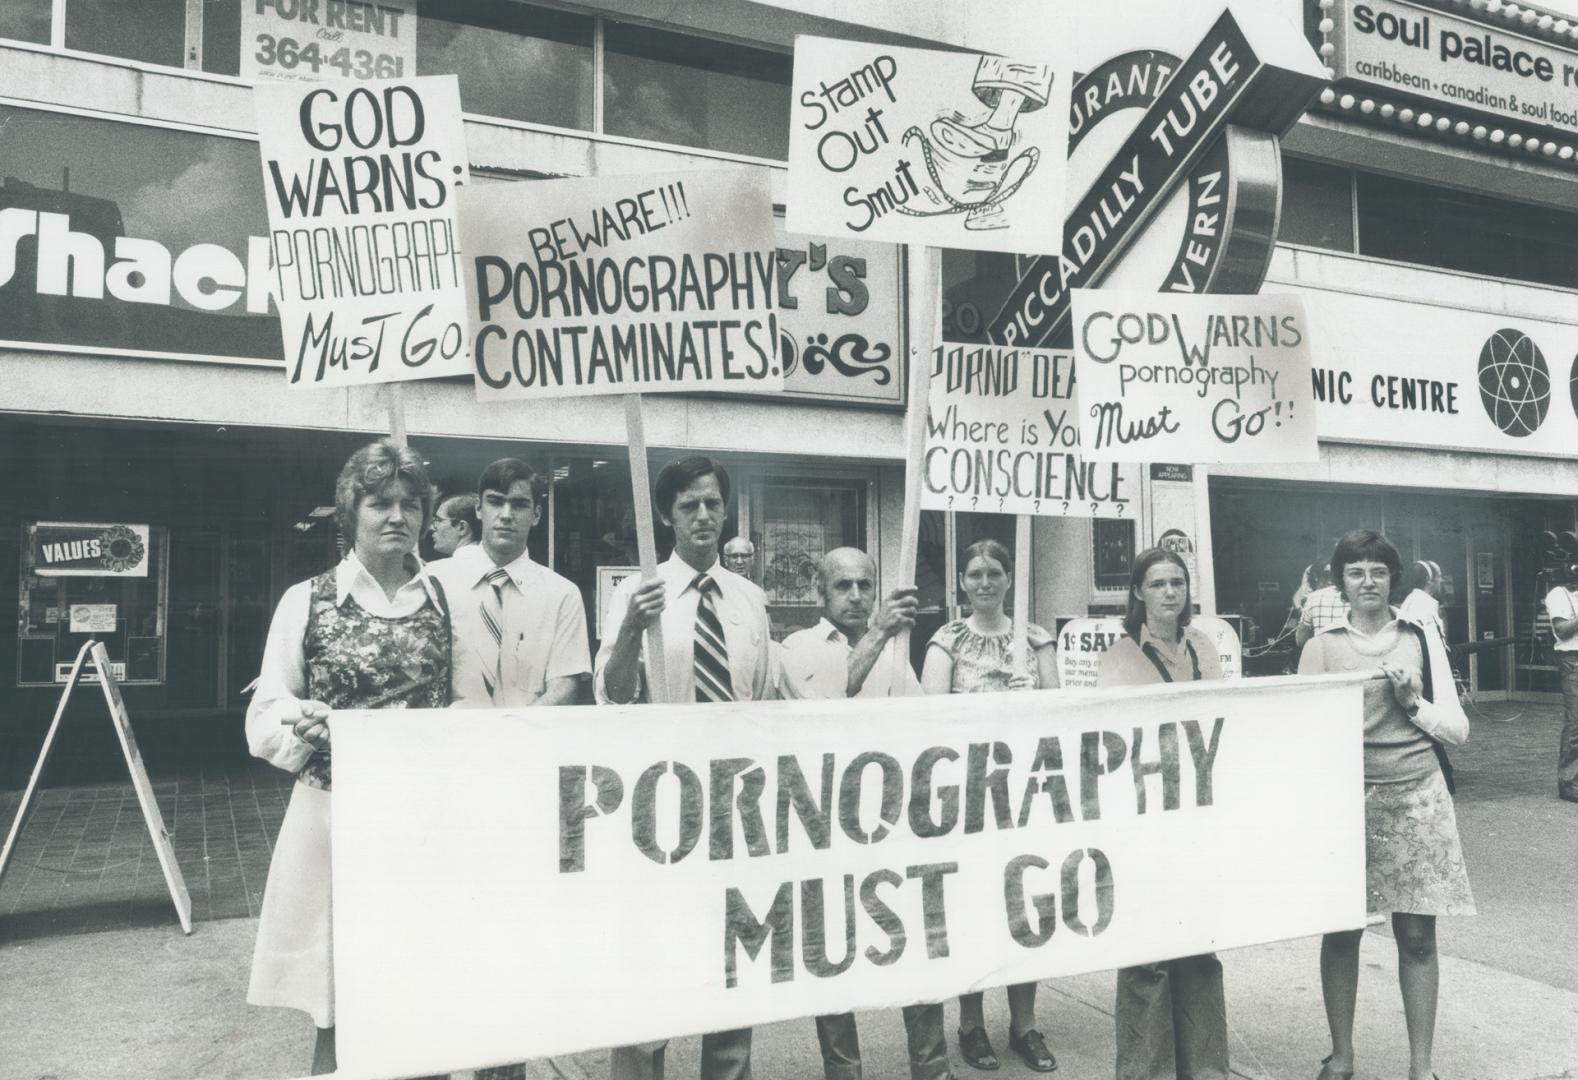 Protesting against pornography, a group of men and women from the newly formed Toronto chapter of the International Family Association, a non-religiou(...)